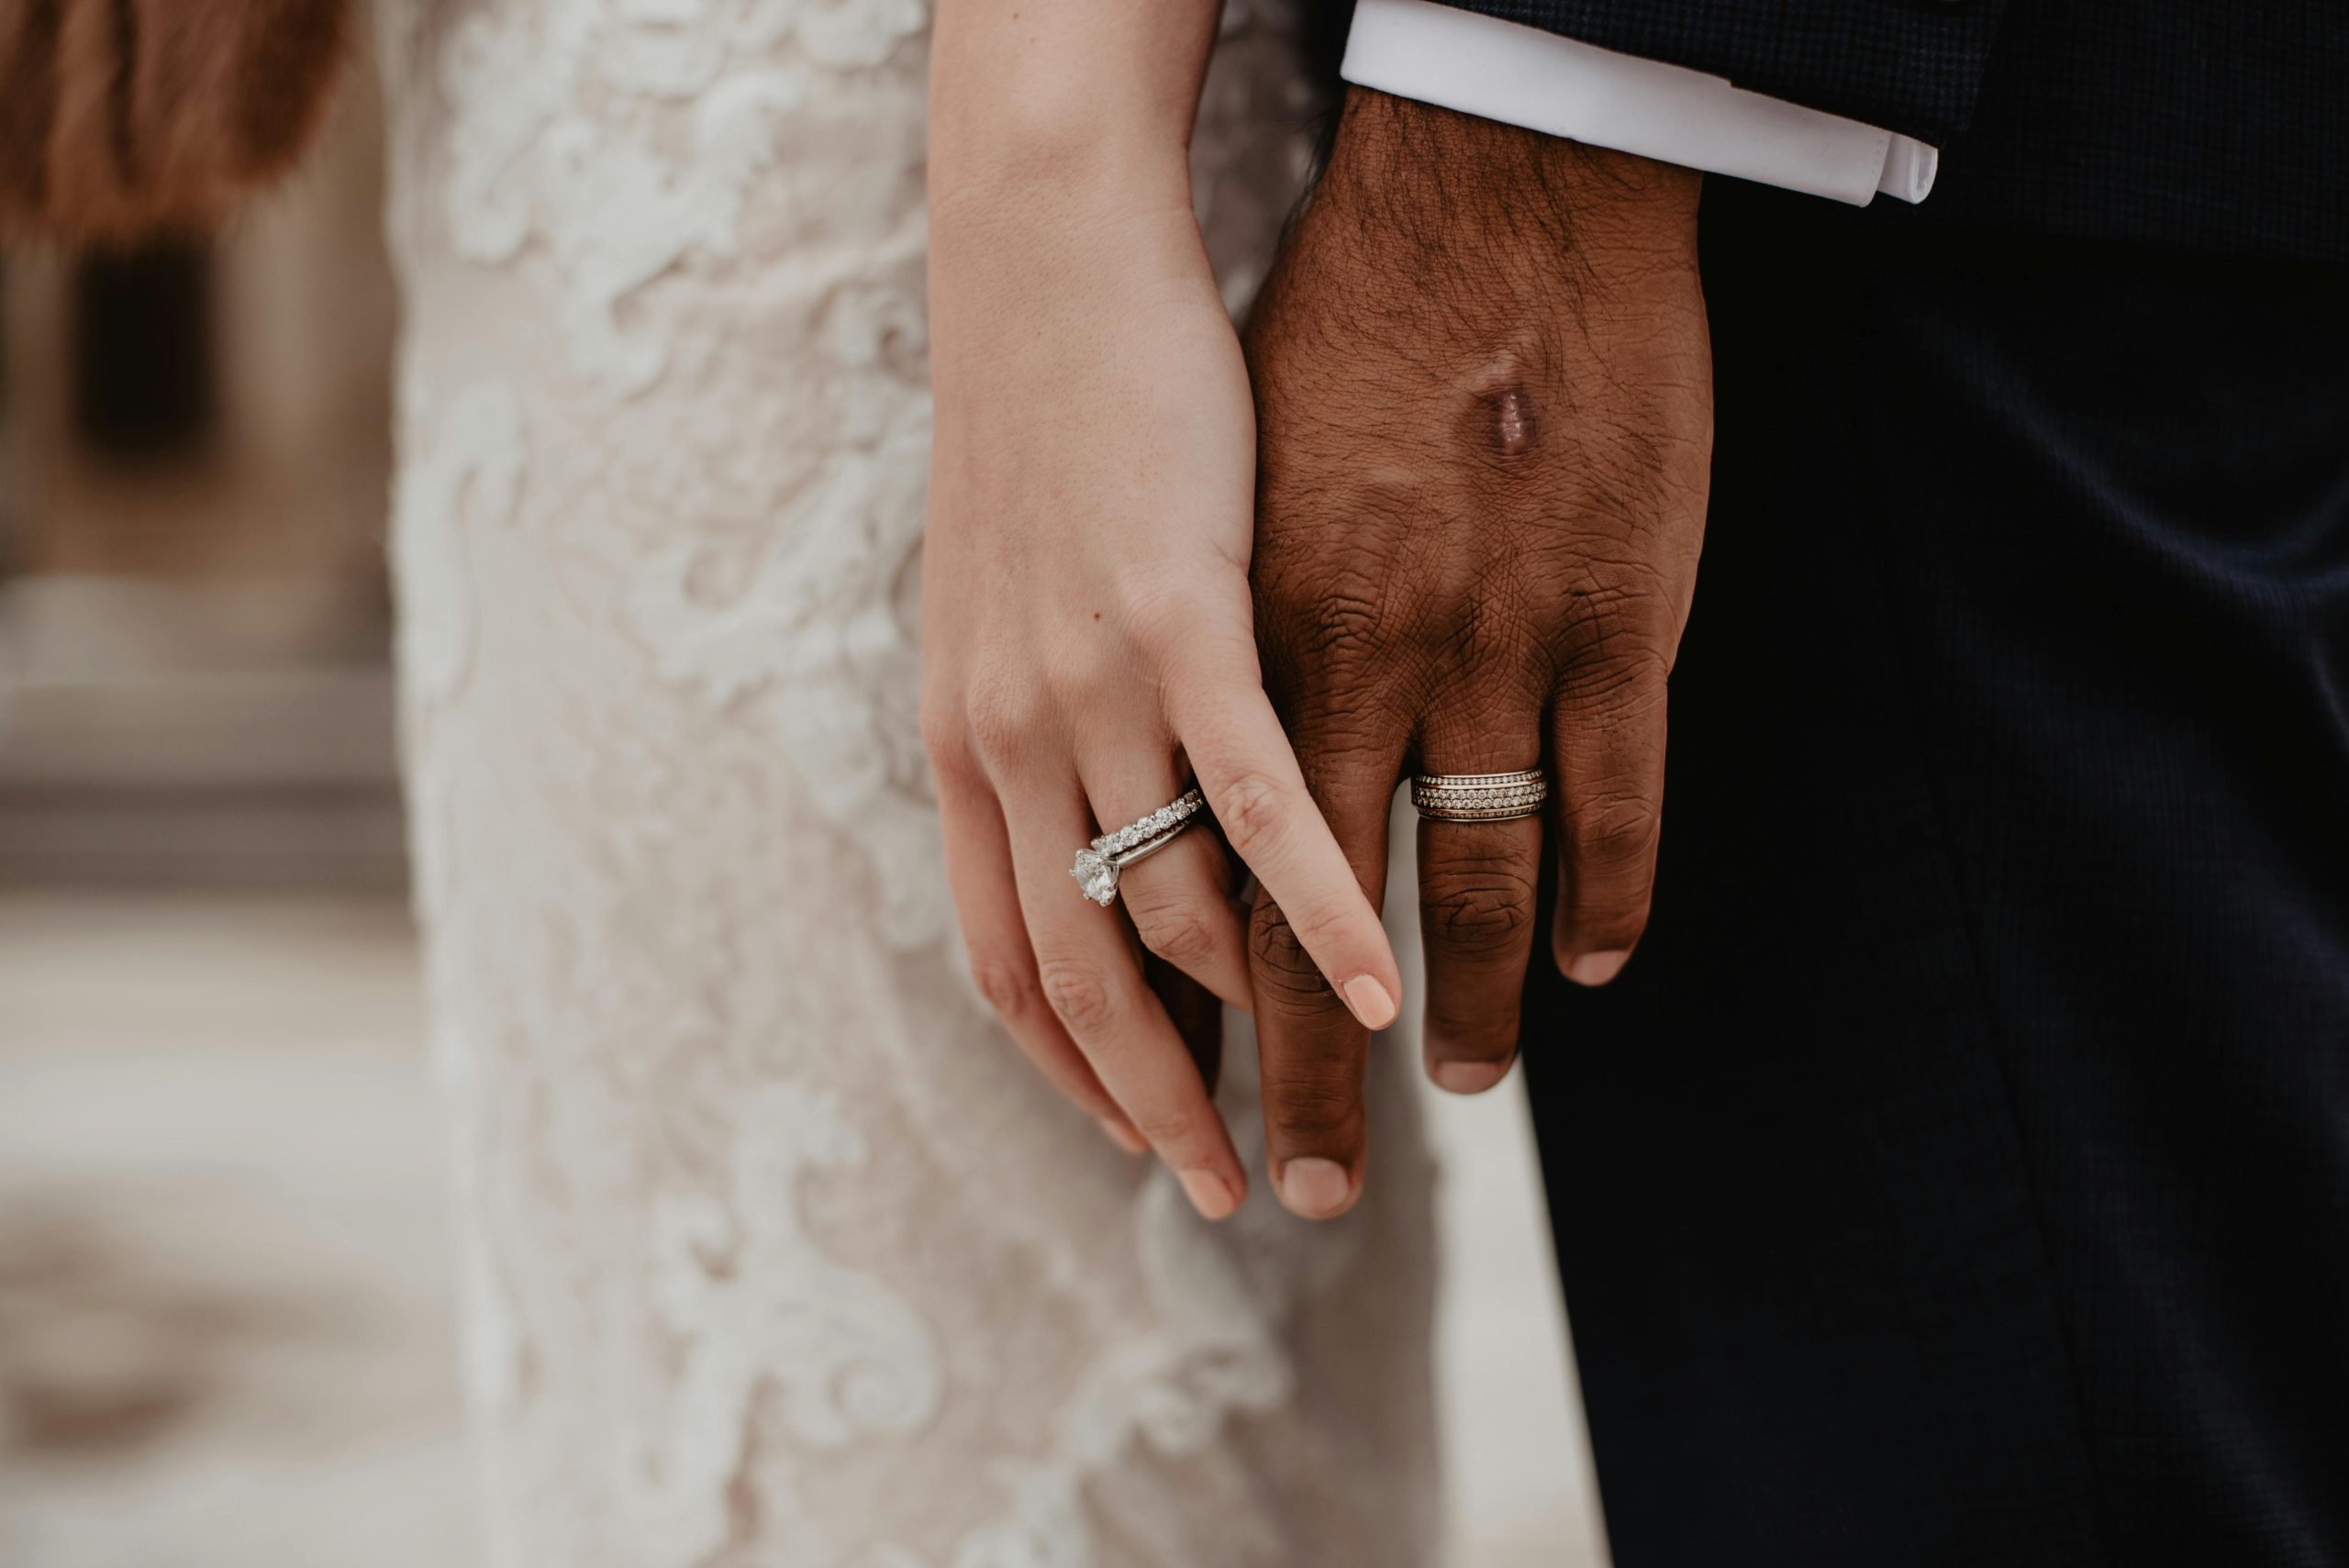 Mens wedding band holding hands with bride